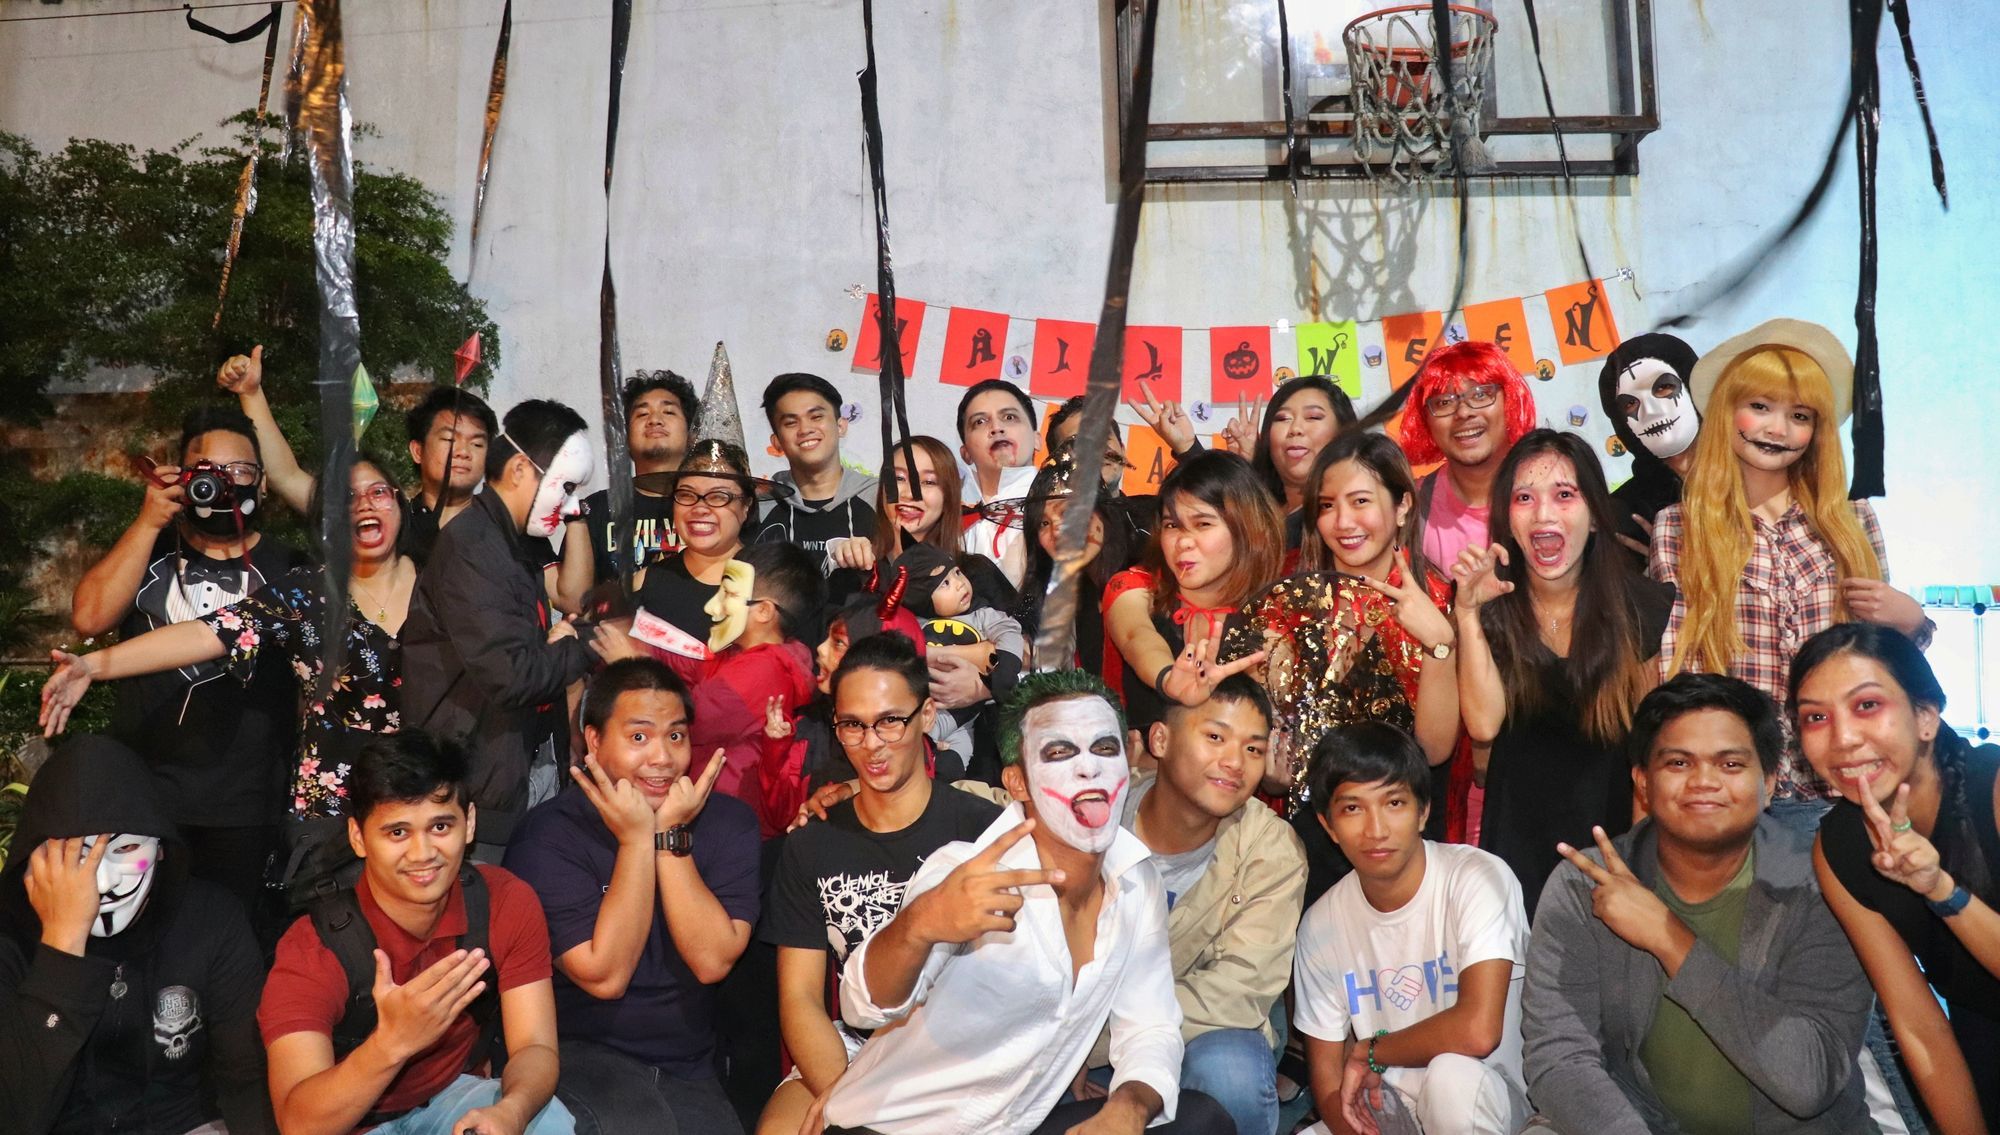 Pragtech Throws Its First Ever Office Halloween Party